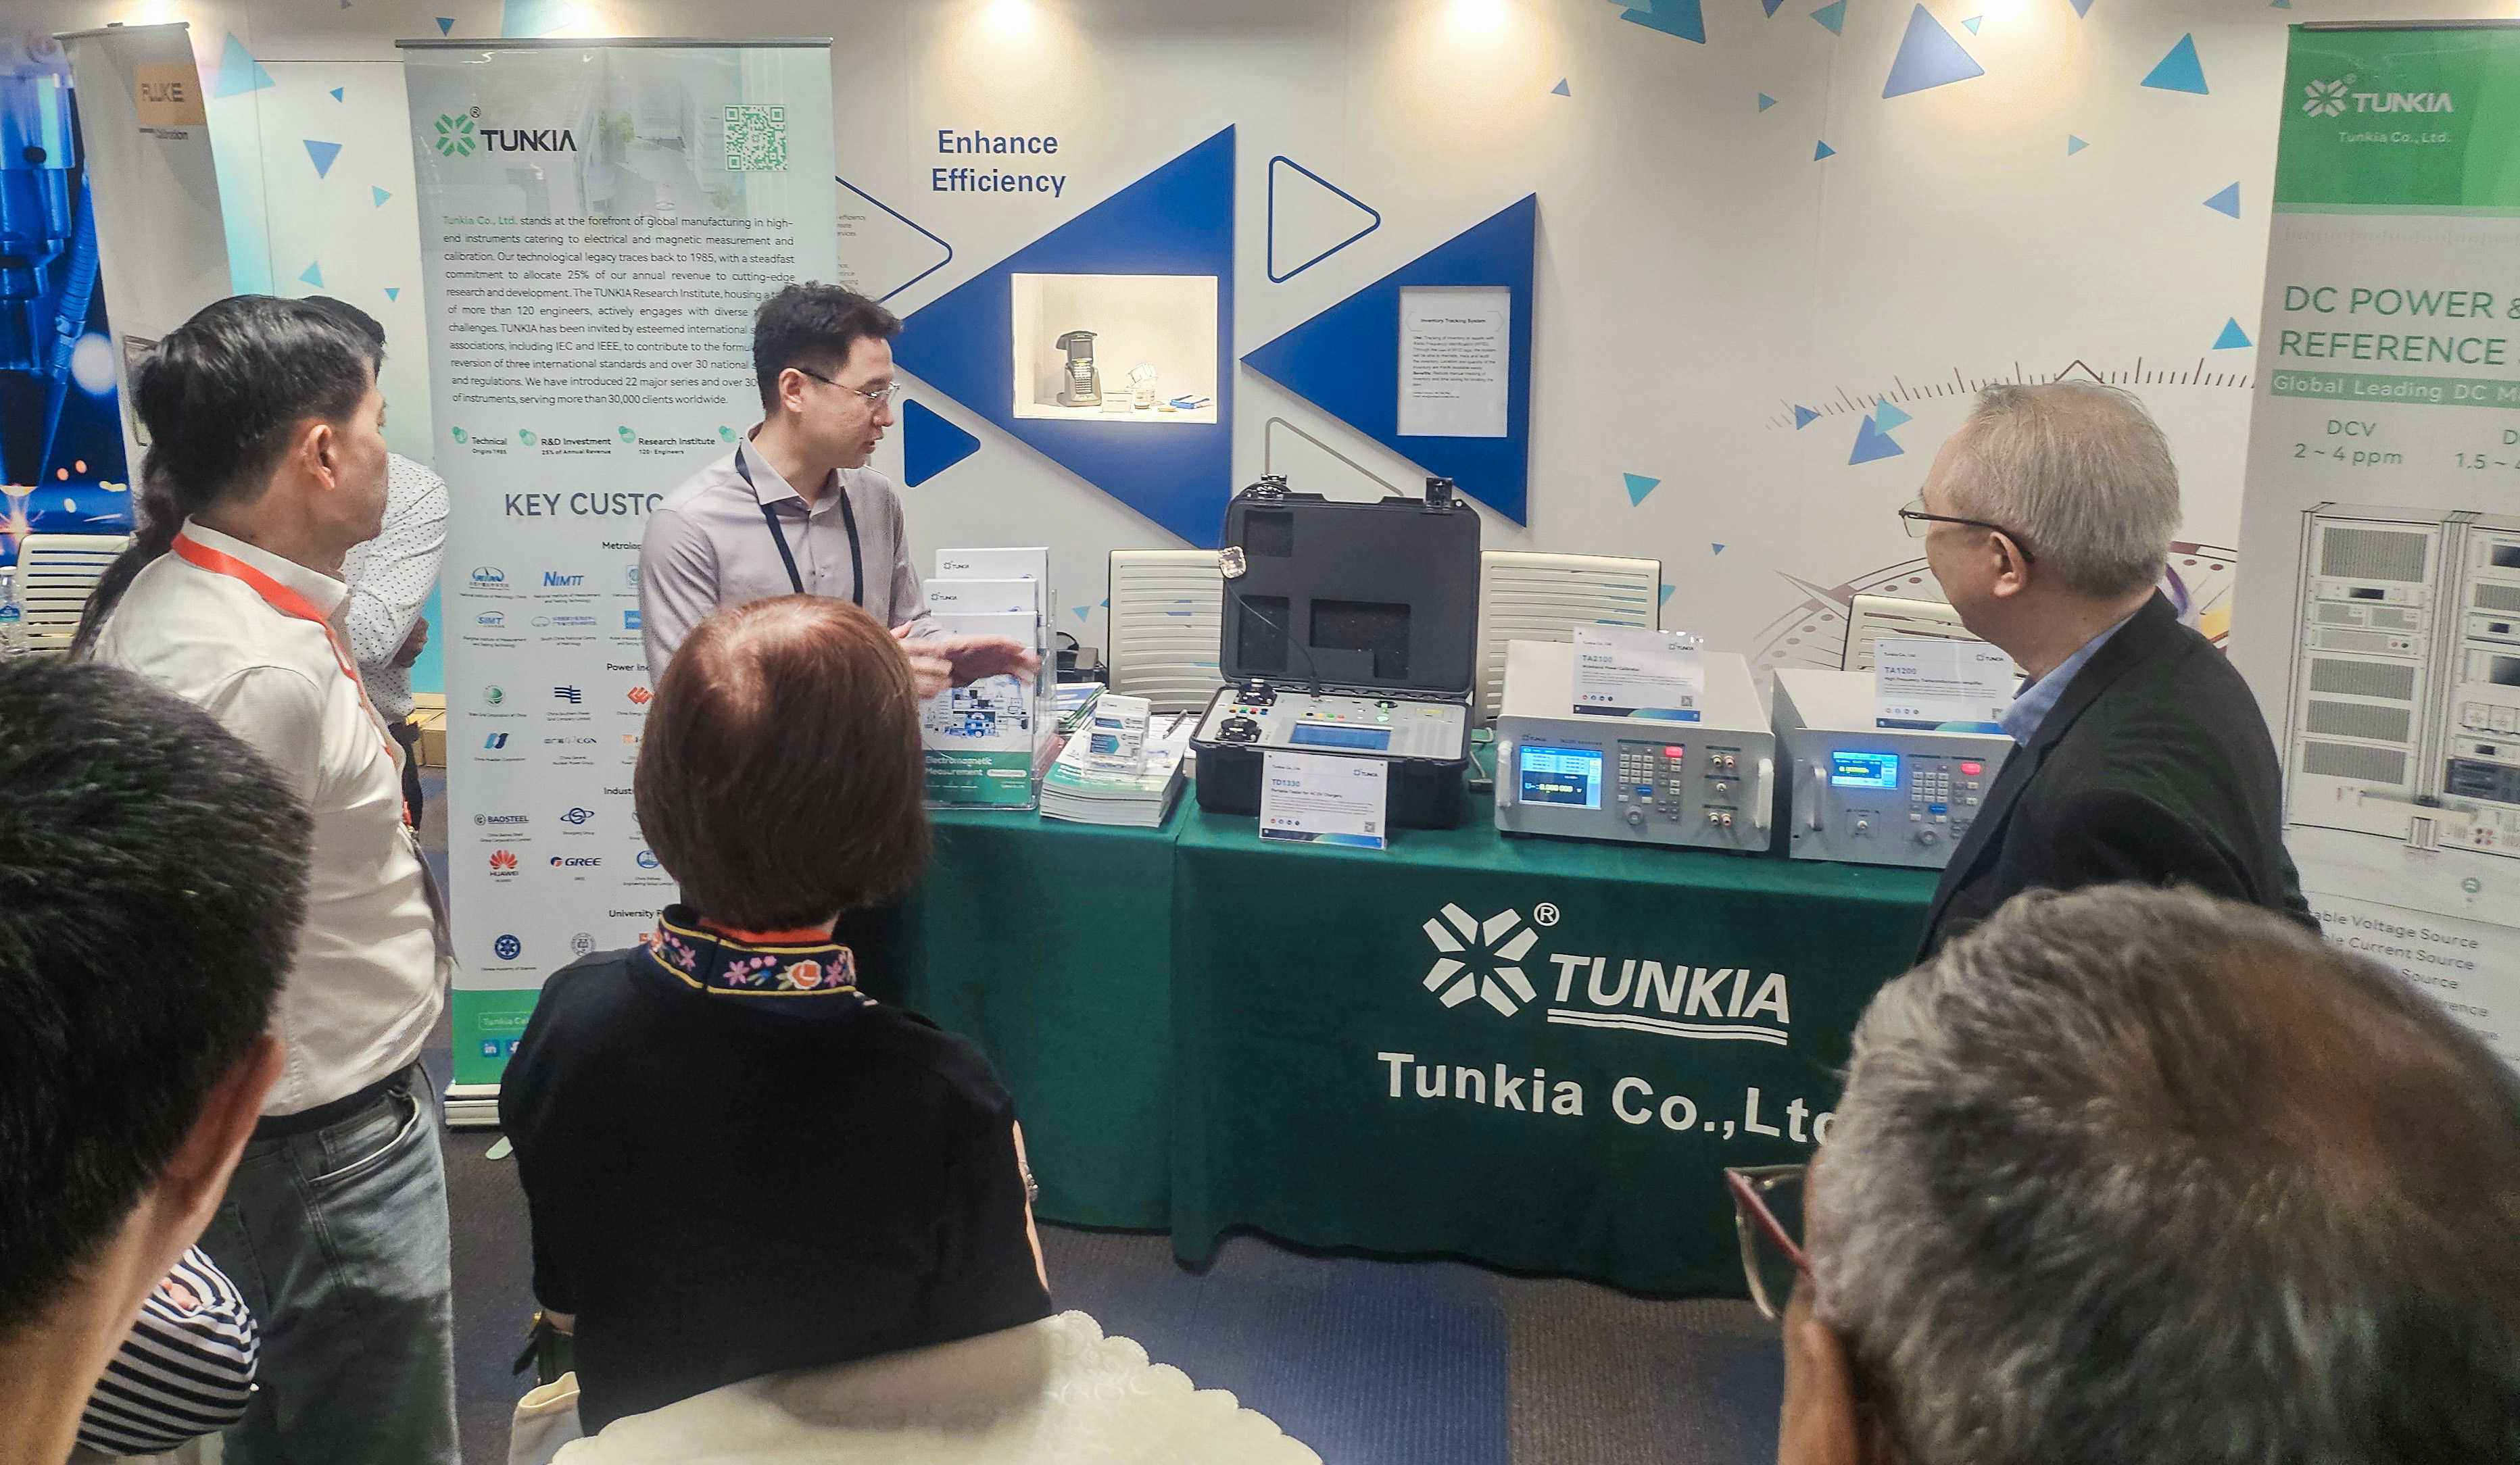 TUNKIA Celebrates World Metrology Day with Global Exhibitions and Product Showcases